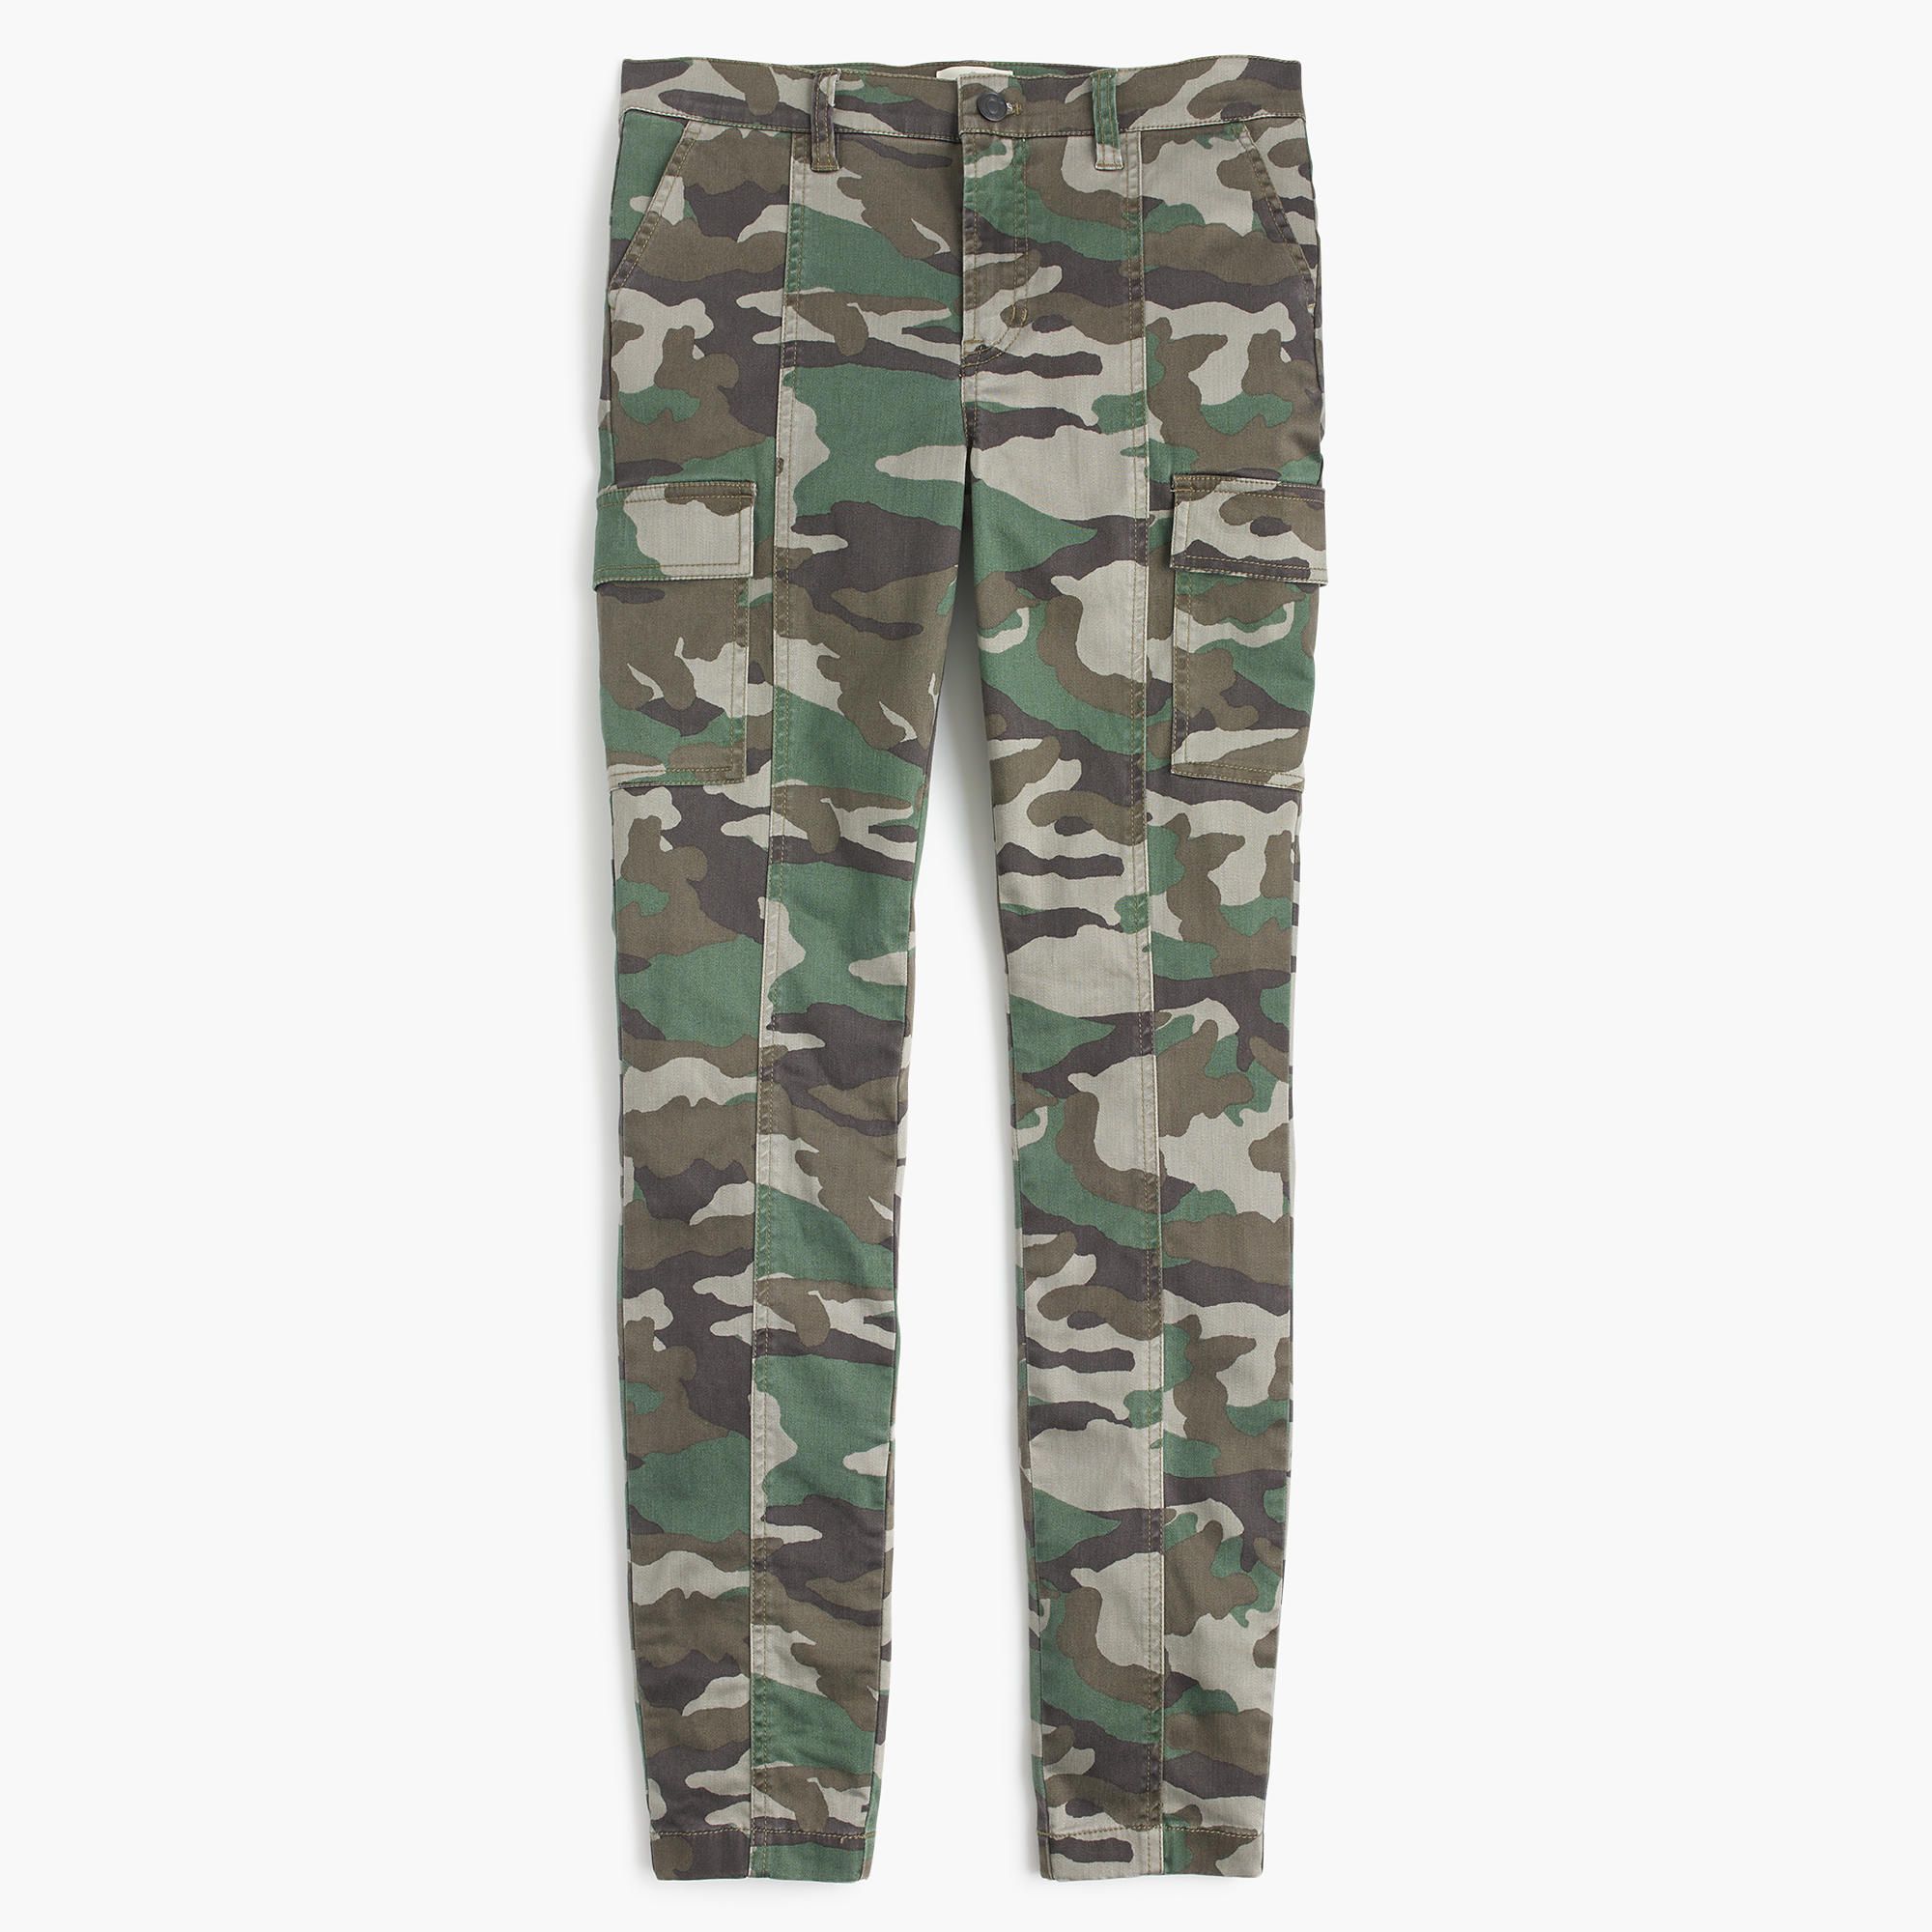 Camouflage is totally a thing right now, and this pant is a cool ...